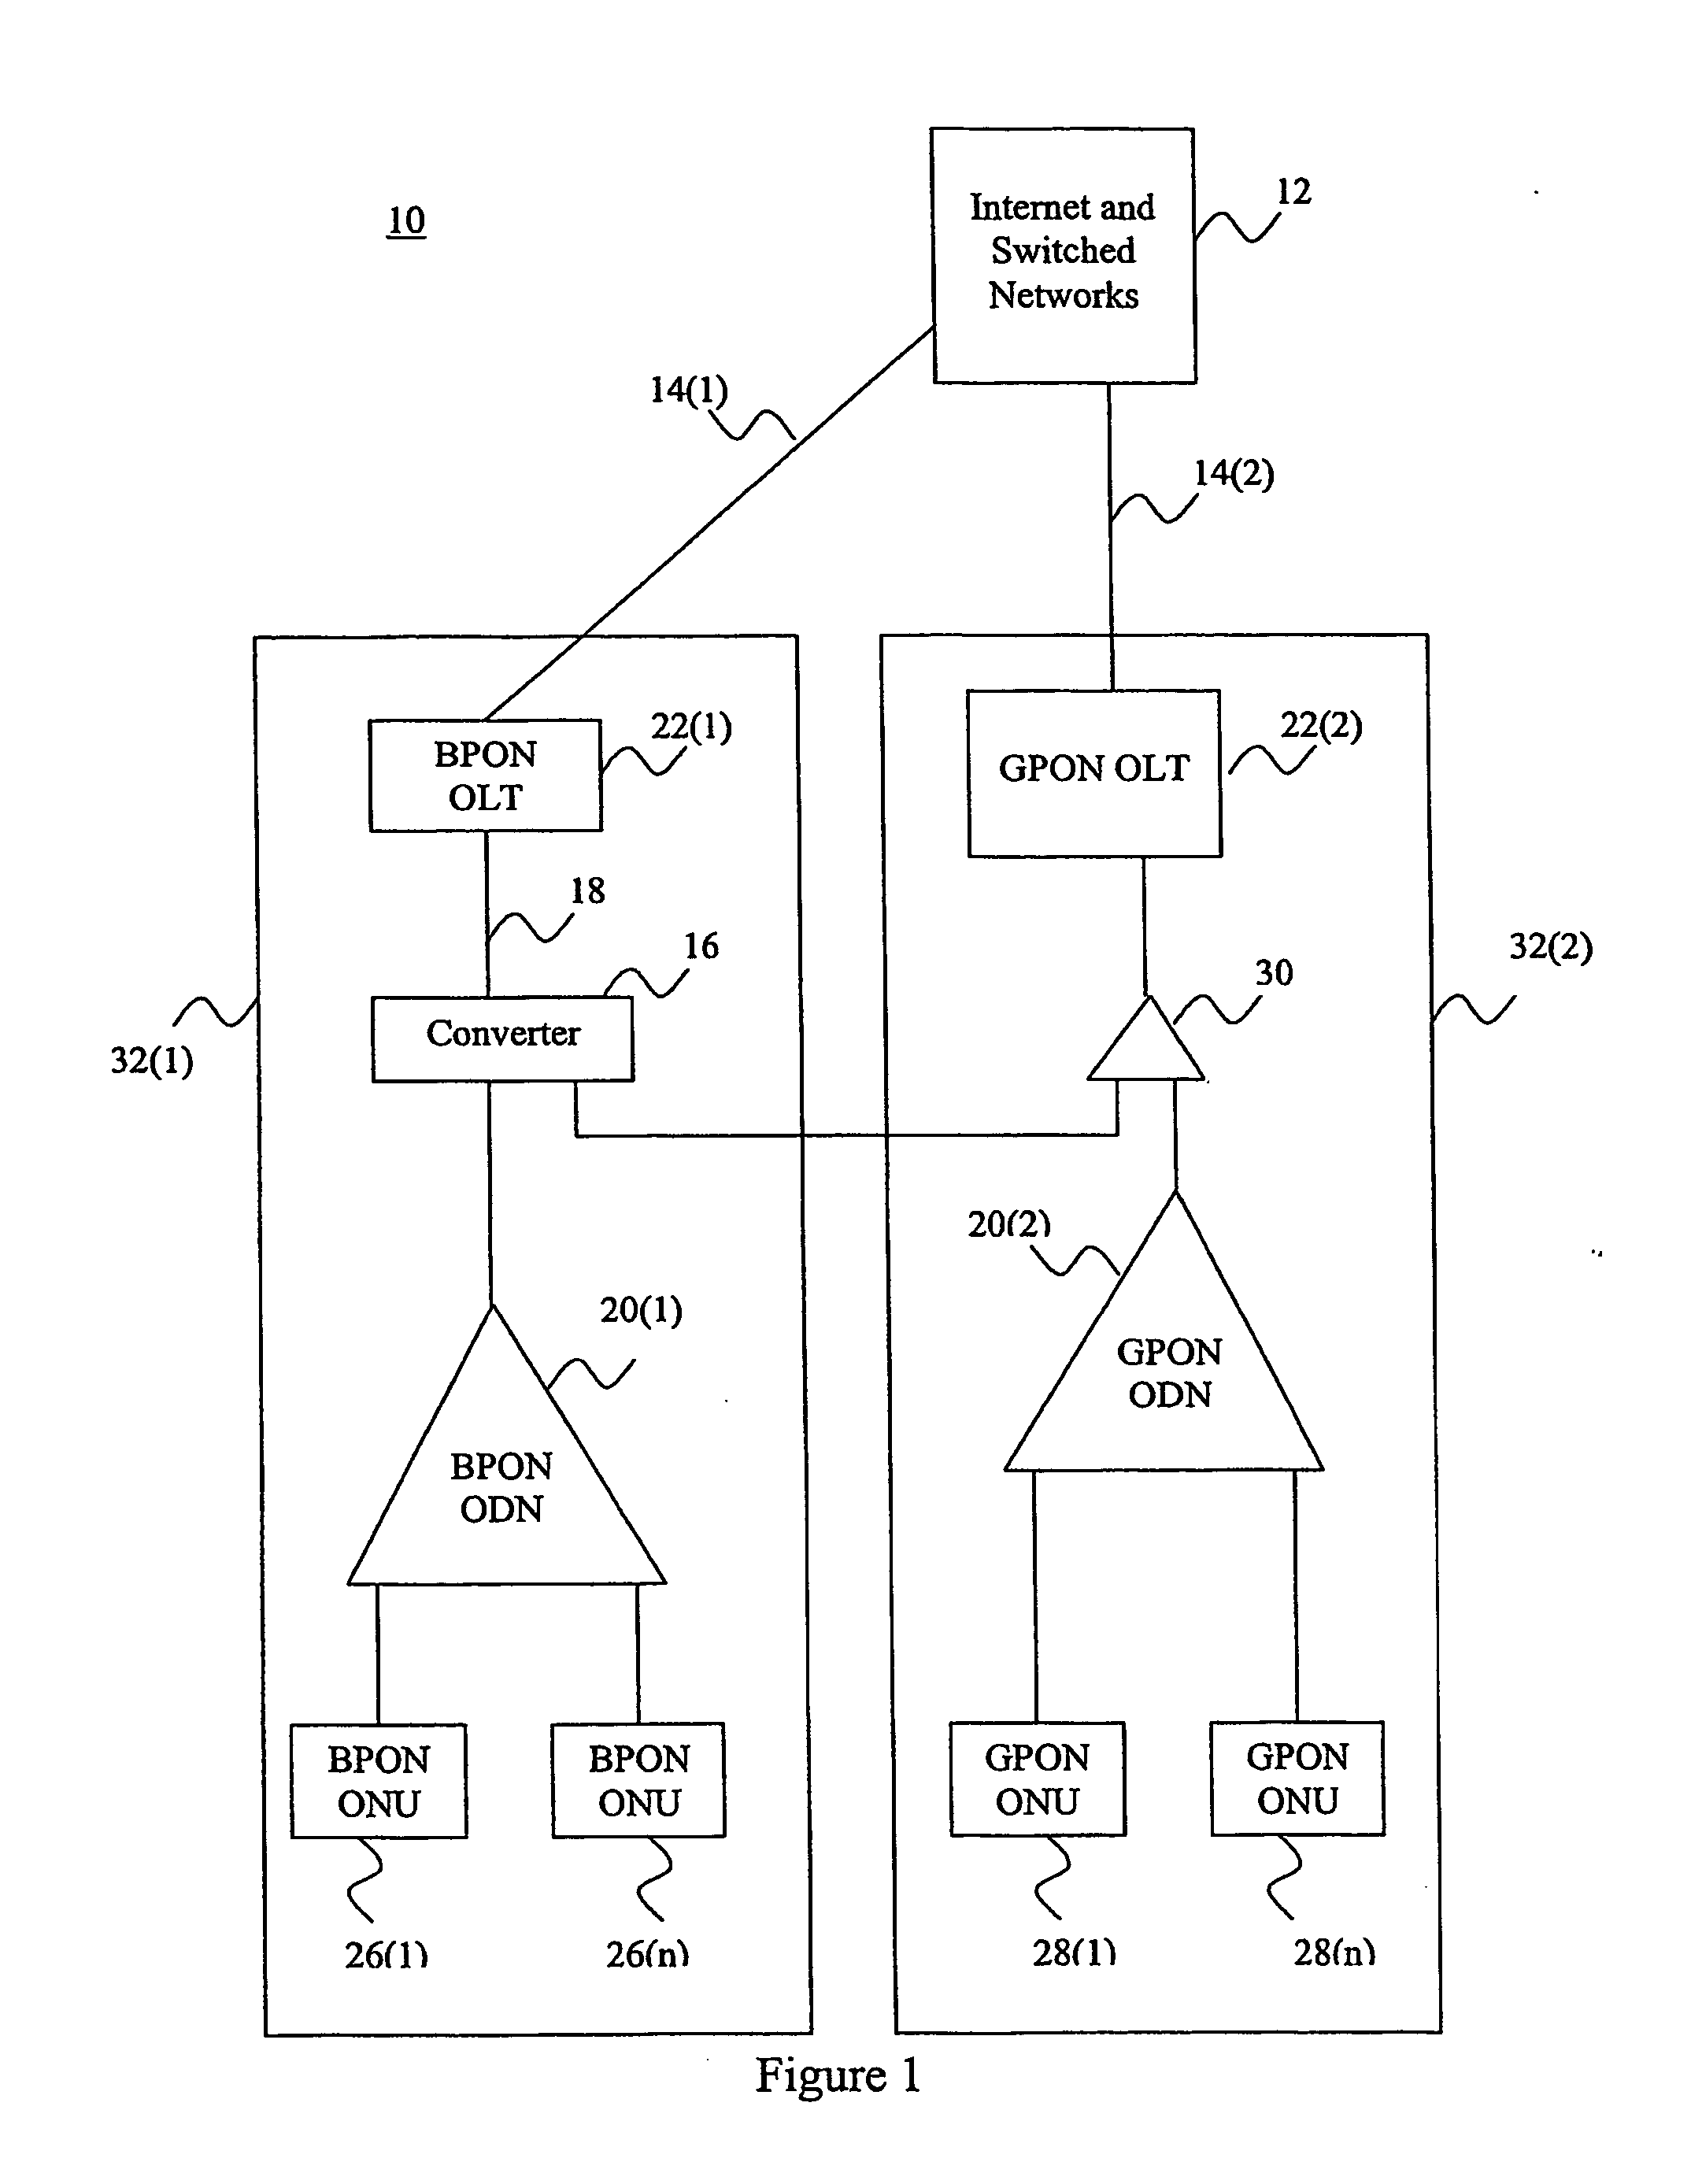 Method and apparatus for communicating between a legacy pon network and an upgraded pon network